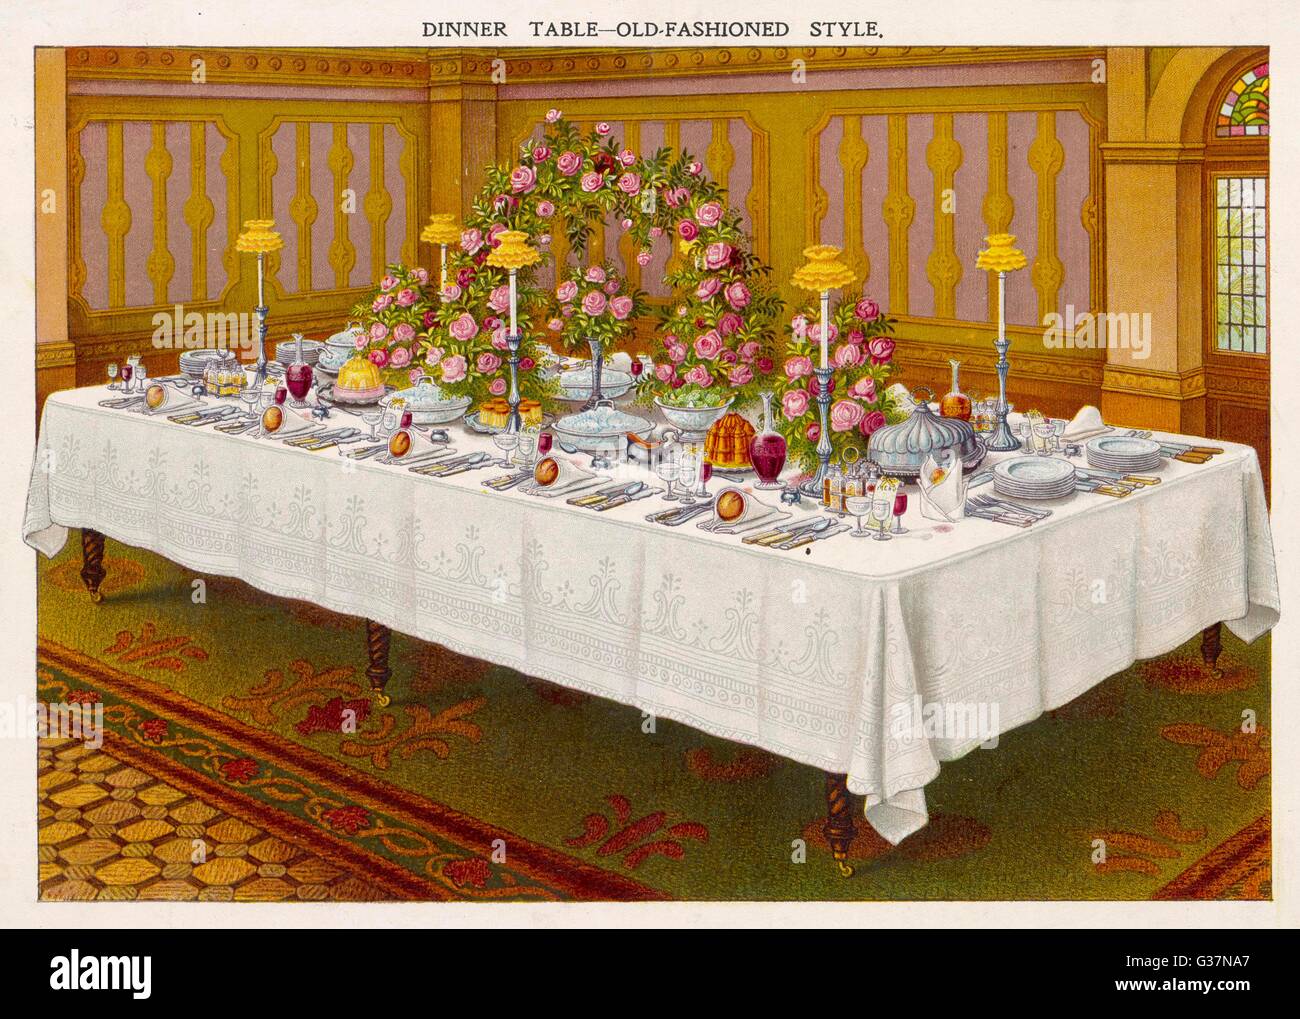 DINNER TABLE A LA FRANCAISE or laid in the 'Old-Fashioned'  style        Date: circa 1890 Stock Photo